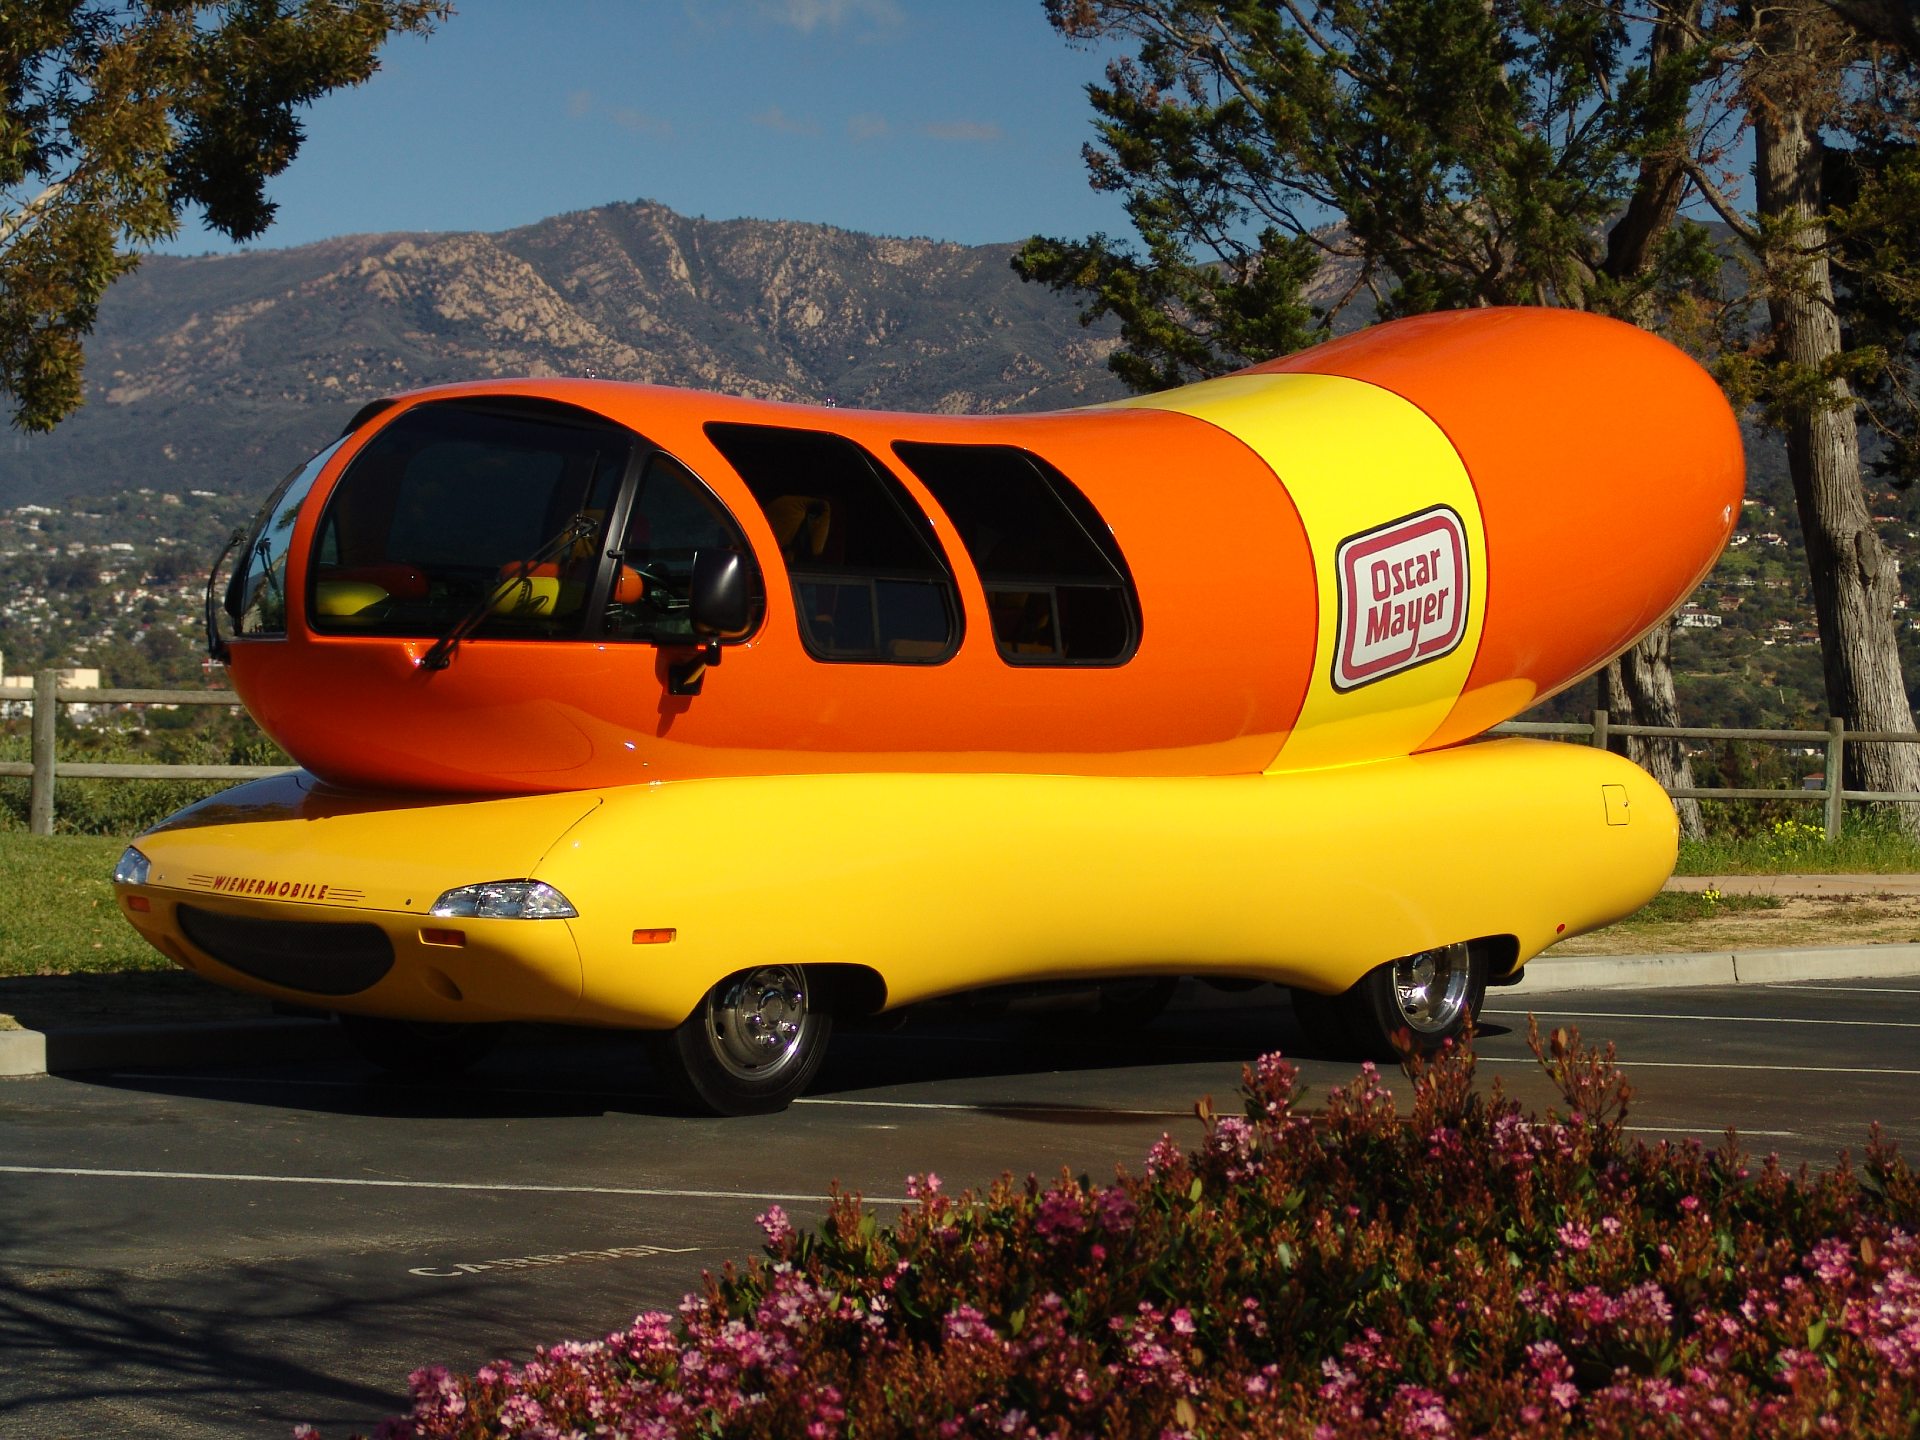 Weinermobile Struck by Catalytic Converter Thieves | THE SHOP